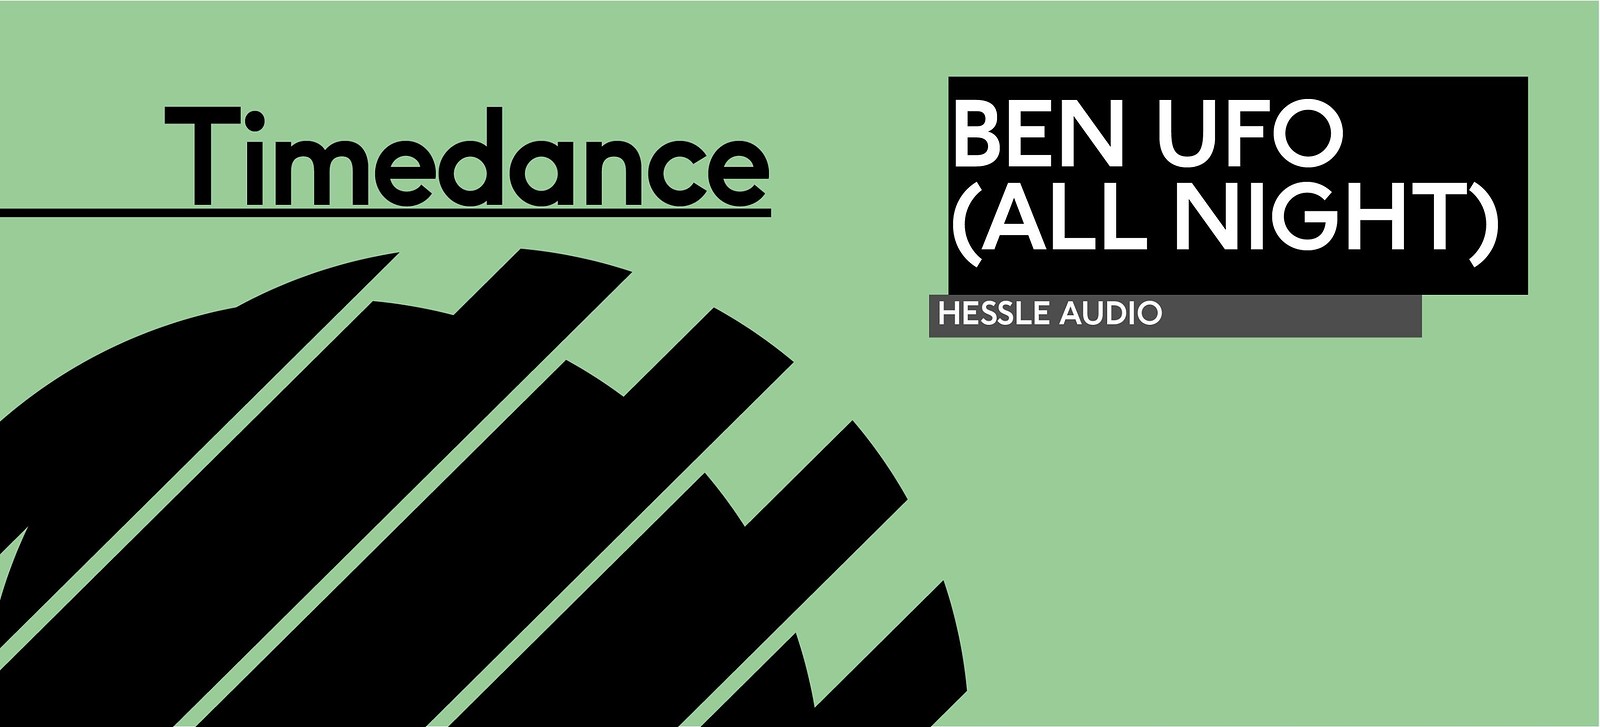 Timedance: Ben UFO at The Island